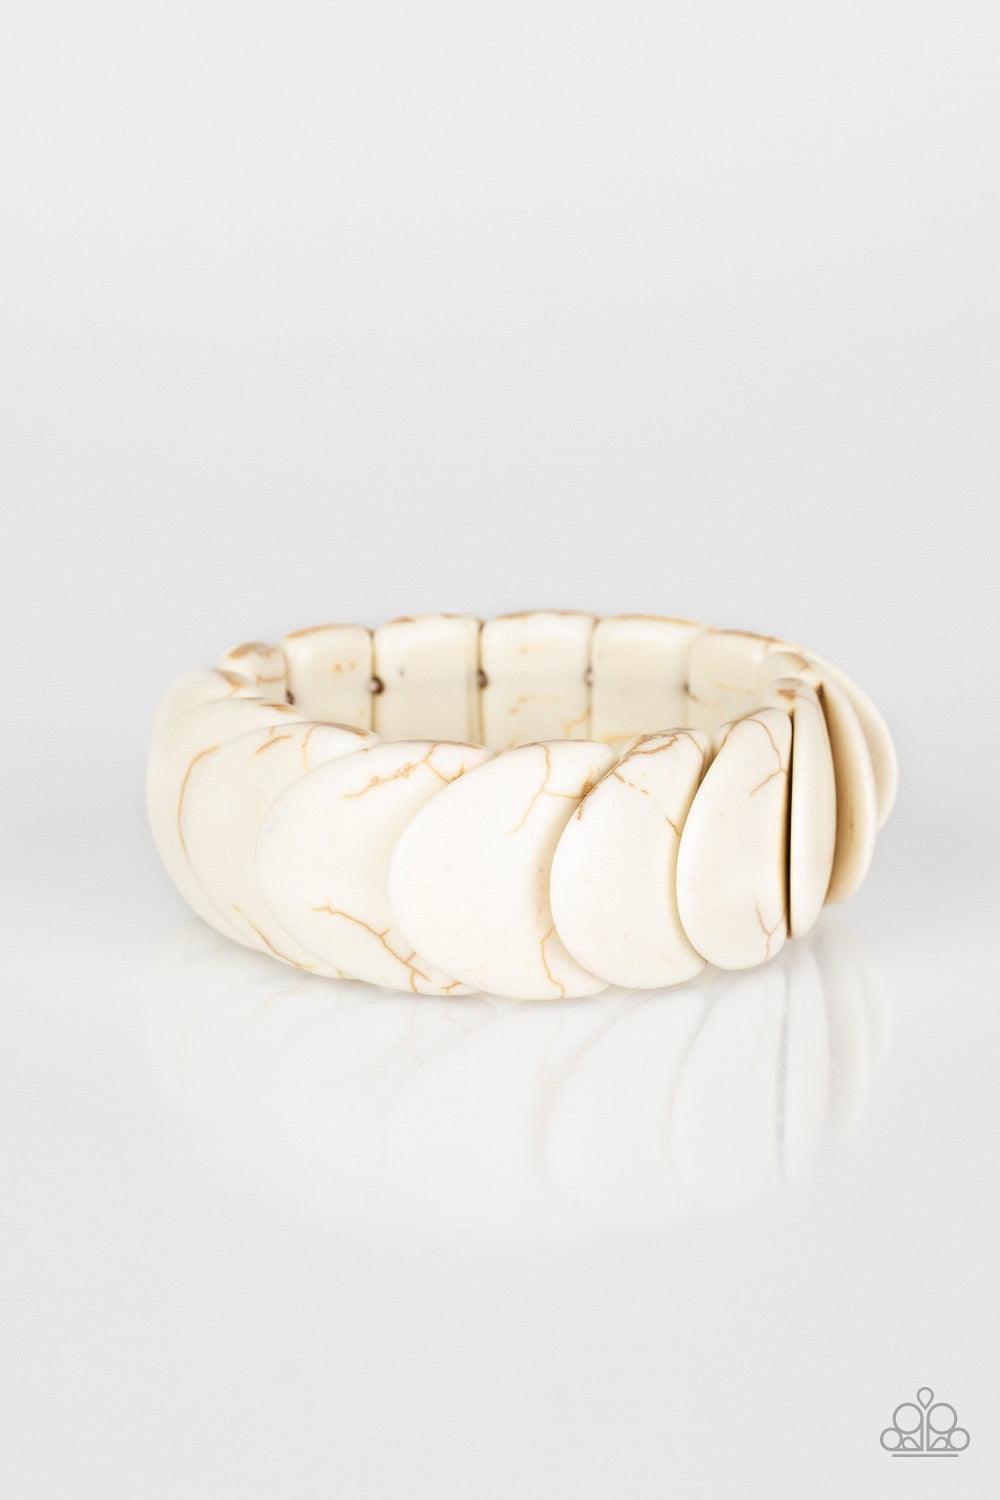 Paparazzi Accessories Normadic Nature - White Overlapping white stones are threaded along stretchy bands around the wrist for an artisan inspired look. Jewelry